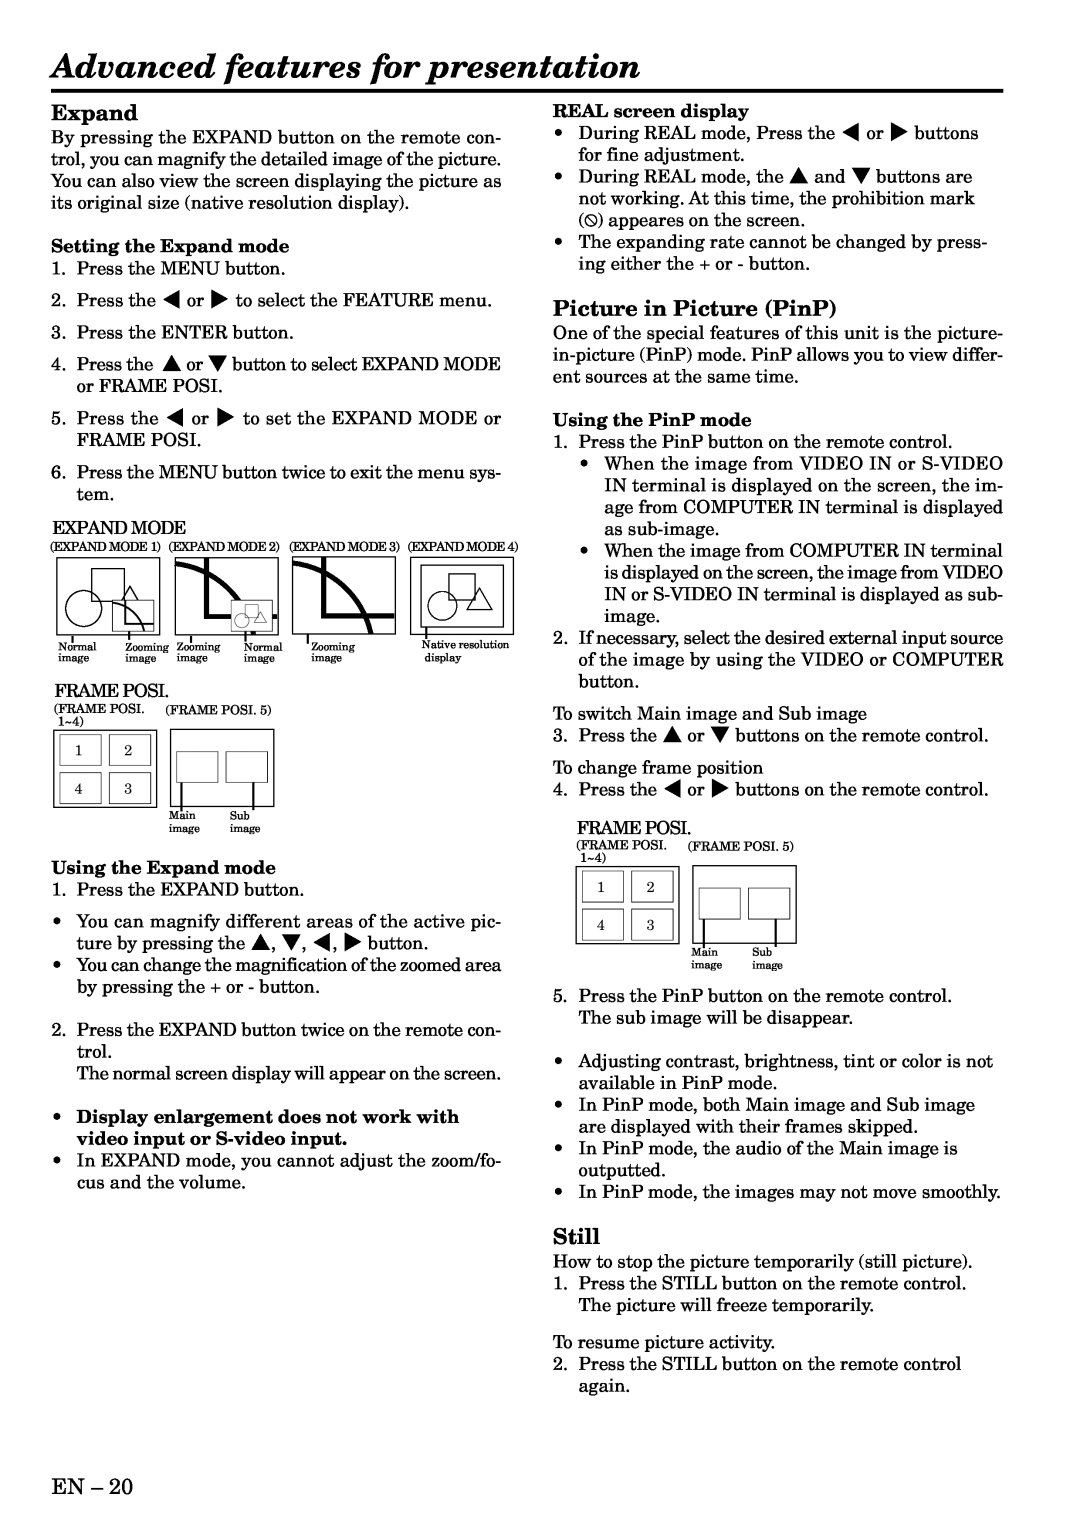 Mitsubishi Electronics X500U user manual Advanced features for presentation, Expand, Picture in Picture PinP, Still 